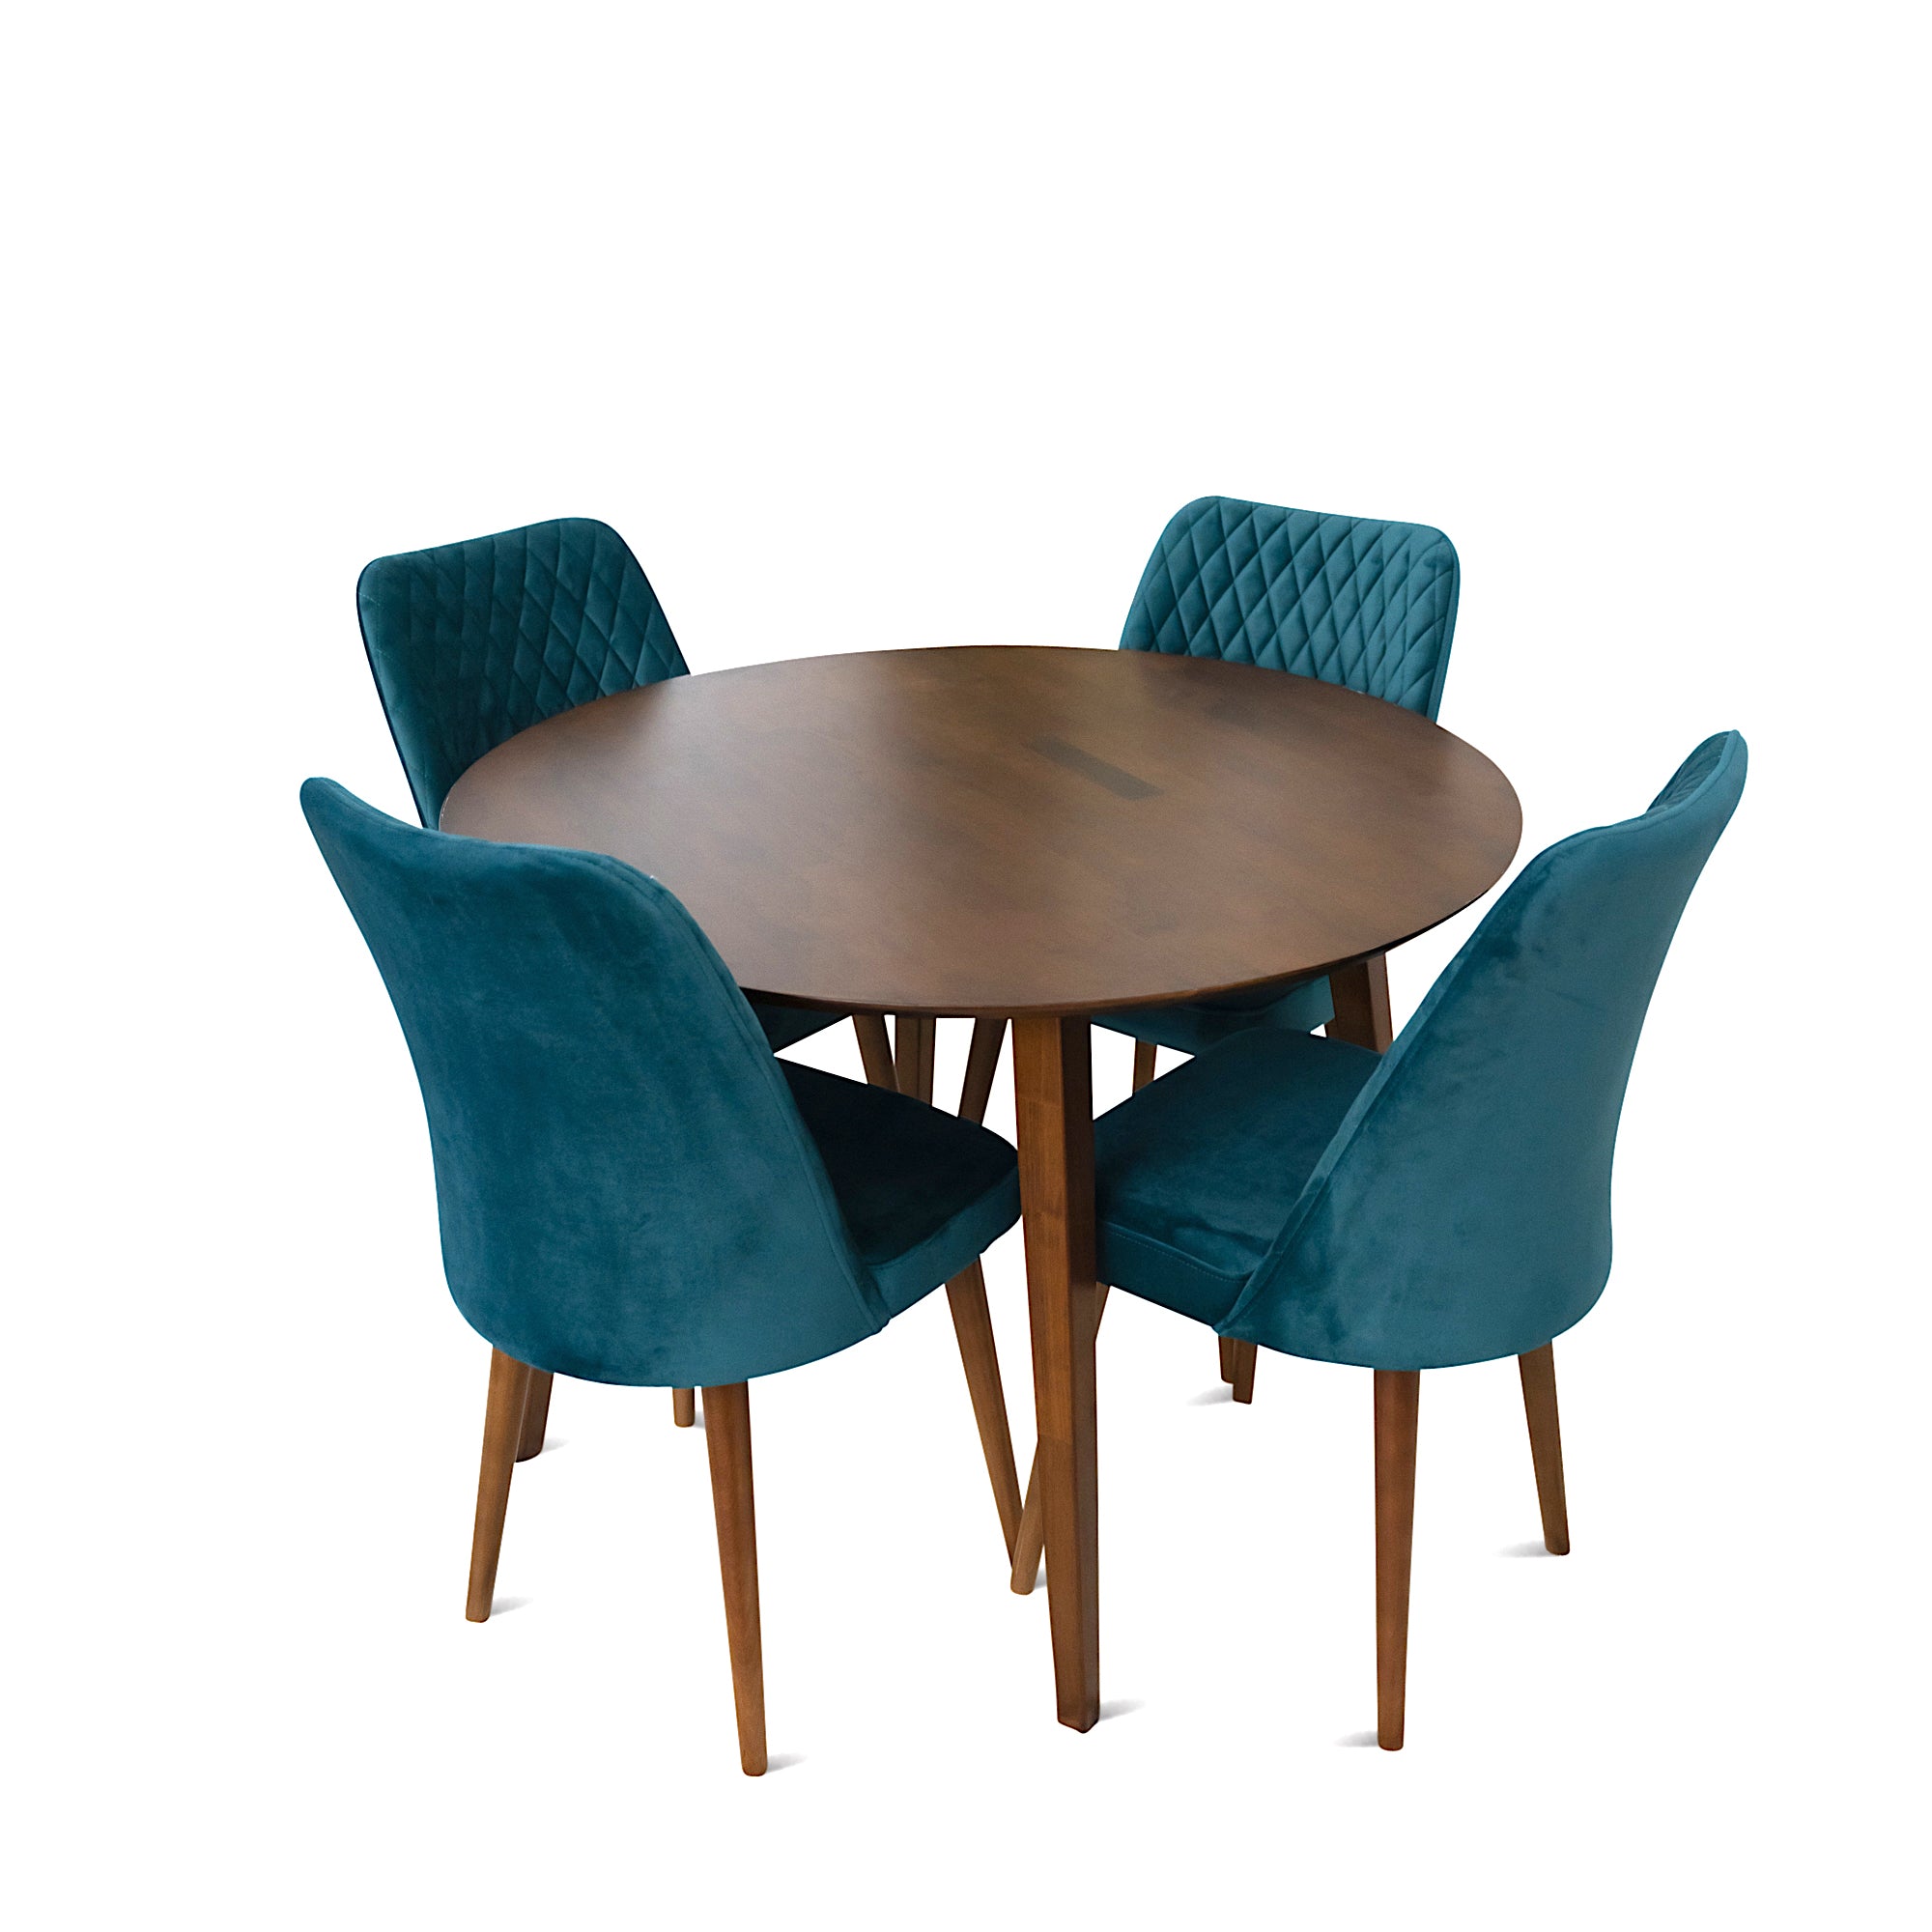 Palmer Dining set with 4 Evette Teal Dining Chairs (Walnut)